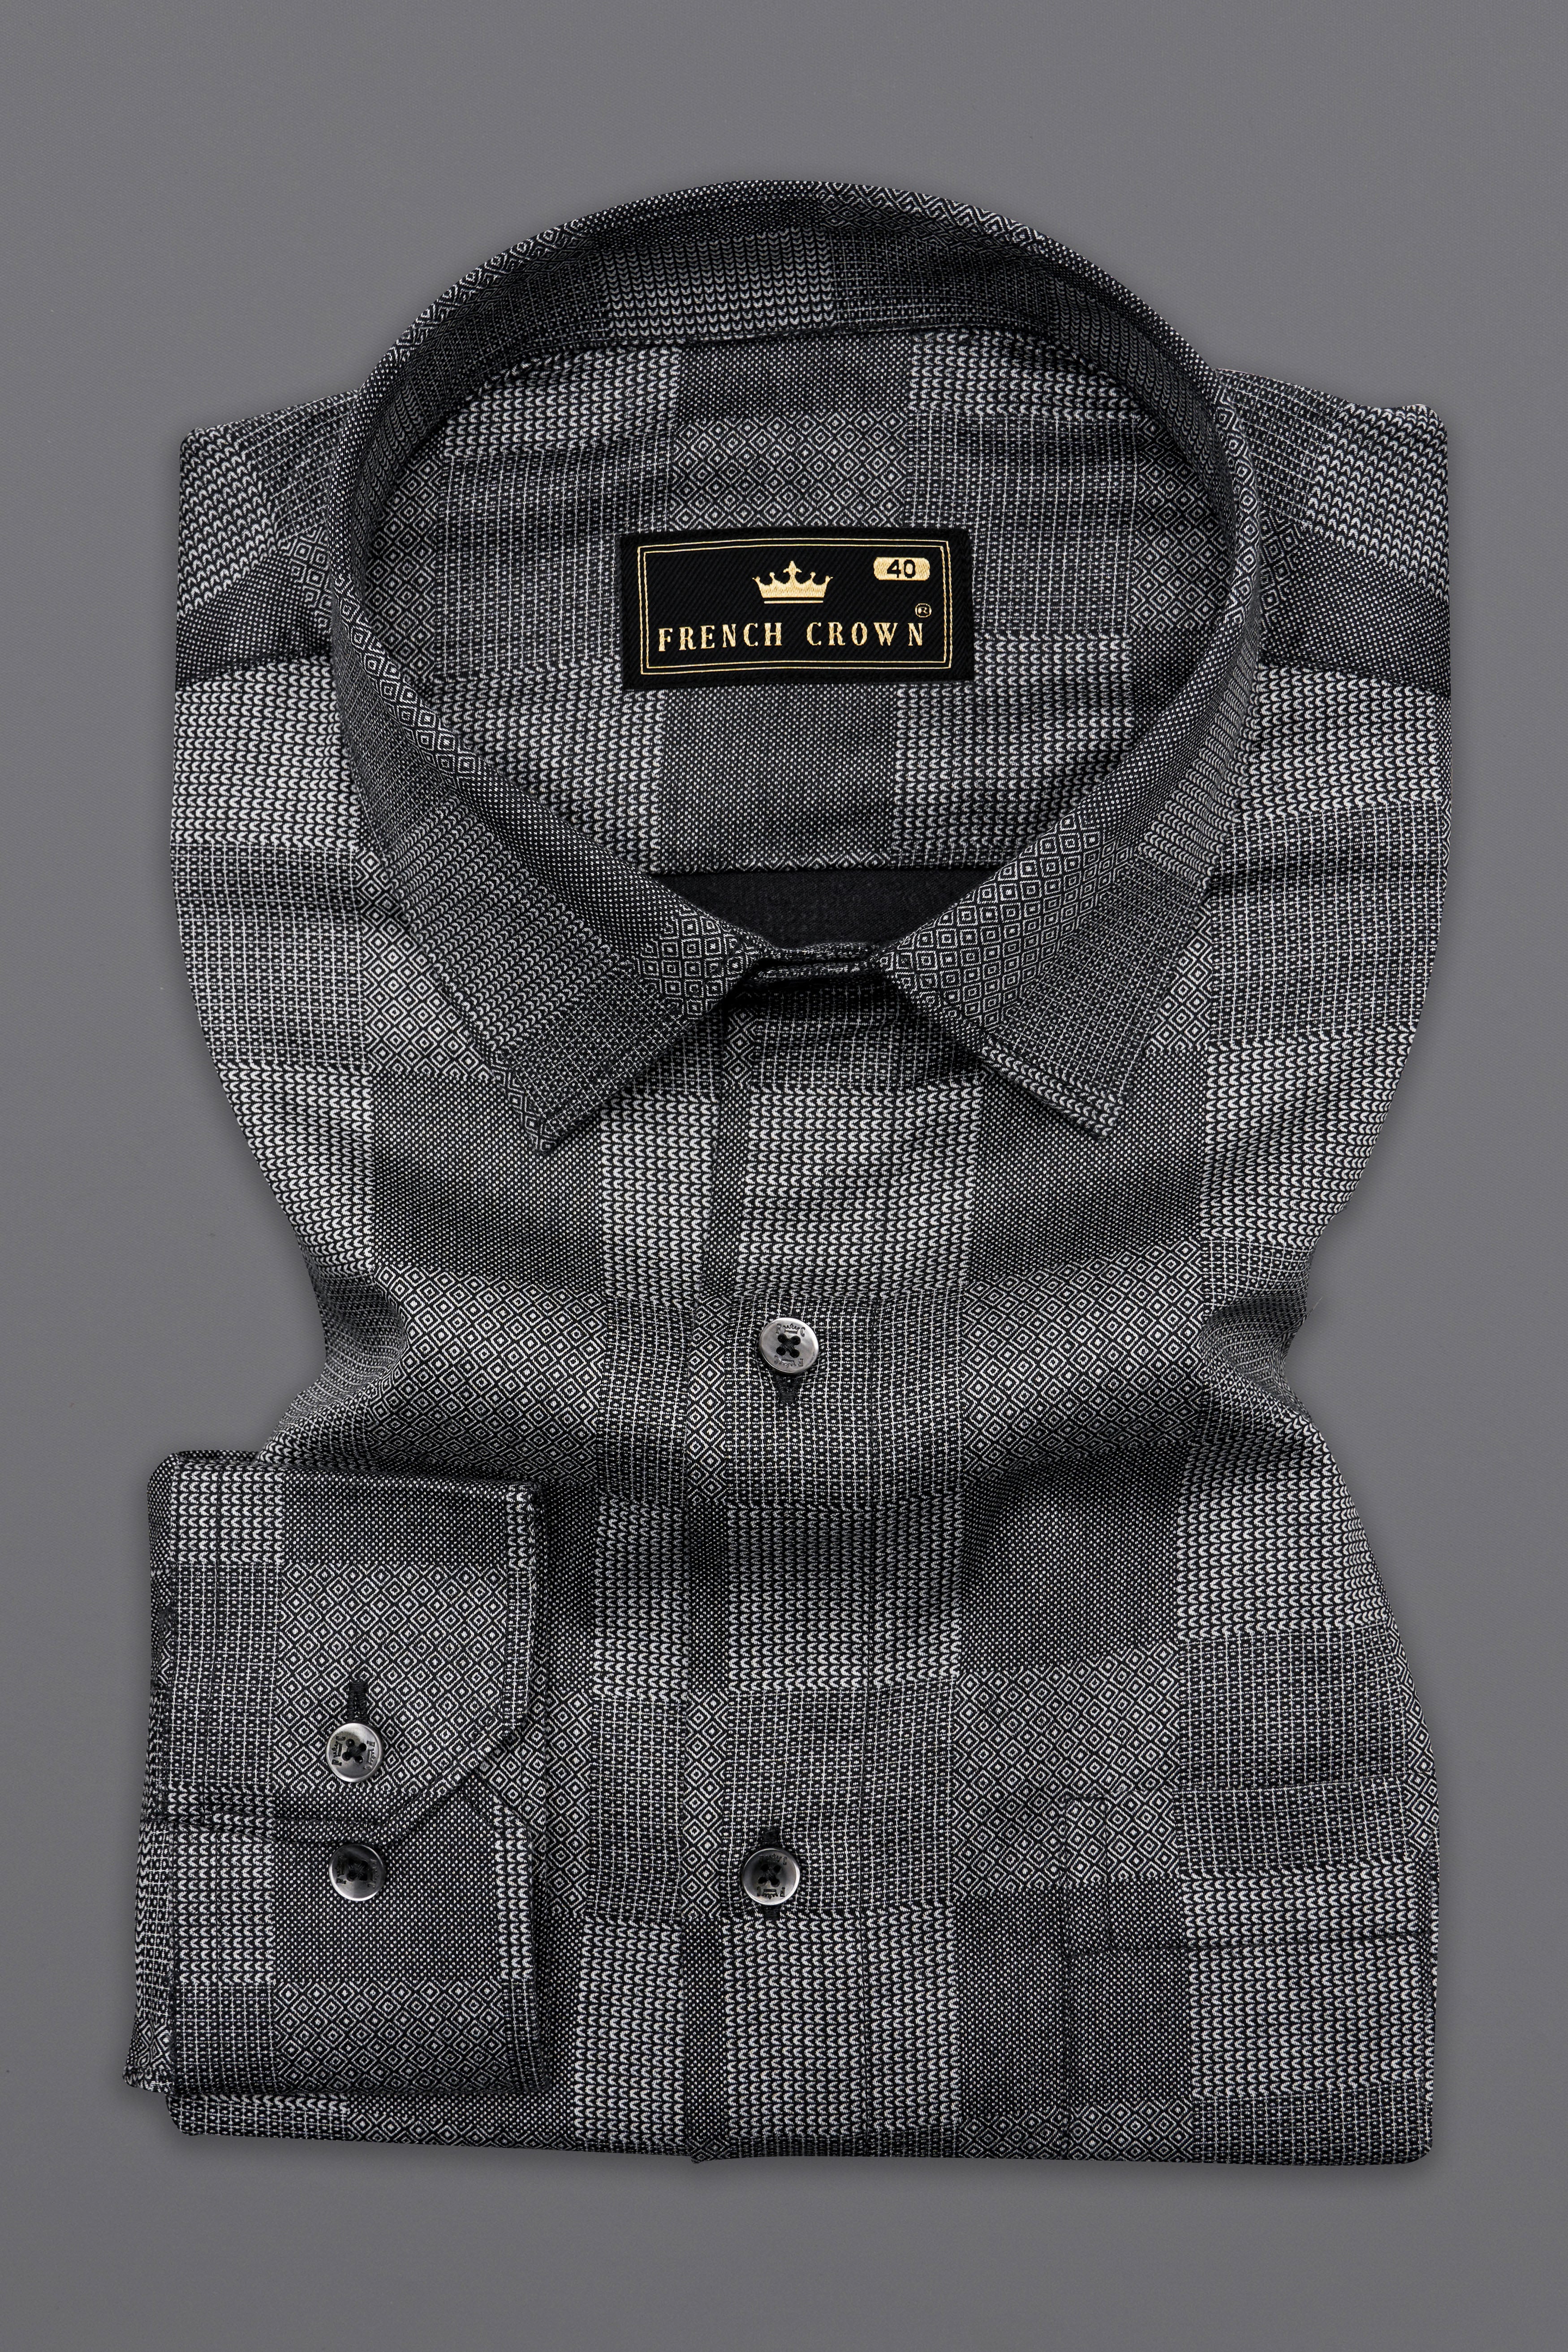 Vampire and Swan Gray Square Printed Super Soft Premium Cotton Shirt 10137-BLK-38, 10137-BLK-H-38, 10137-BLK-39, 10137-BLK-H-39, 10137-BLK-40, 10137-BLK-H-40, 10137-BLK-42, 10137-BLK-H-42, 10137-BLK-44, 10137-BLK-H-44, 10137-BLK-46, 10137-BLK-H-46, 10137-BLK-48, 10137-BLK-H-48, 10137-BLK-50, 10137-BLK-H-50, 10137-BLK-52, 10137-BLK-H-52